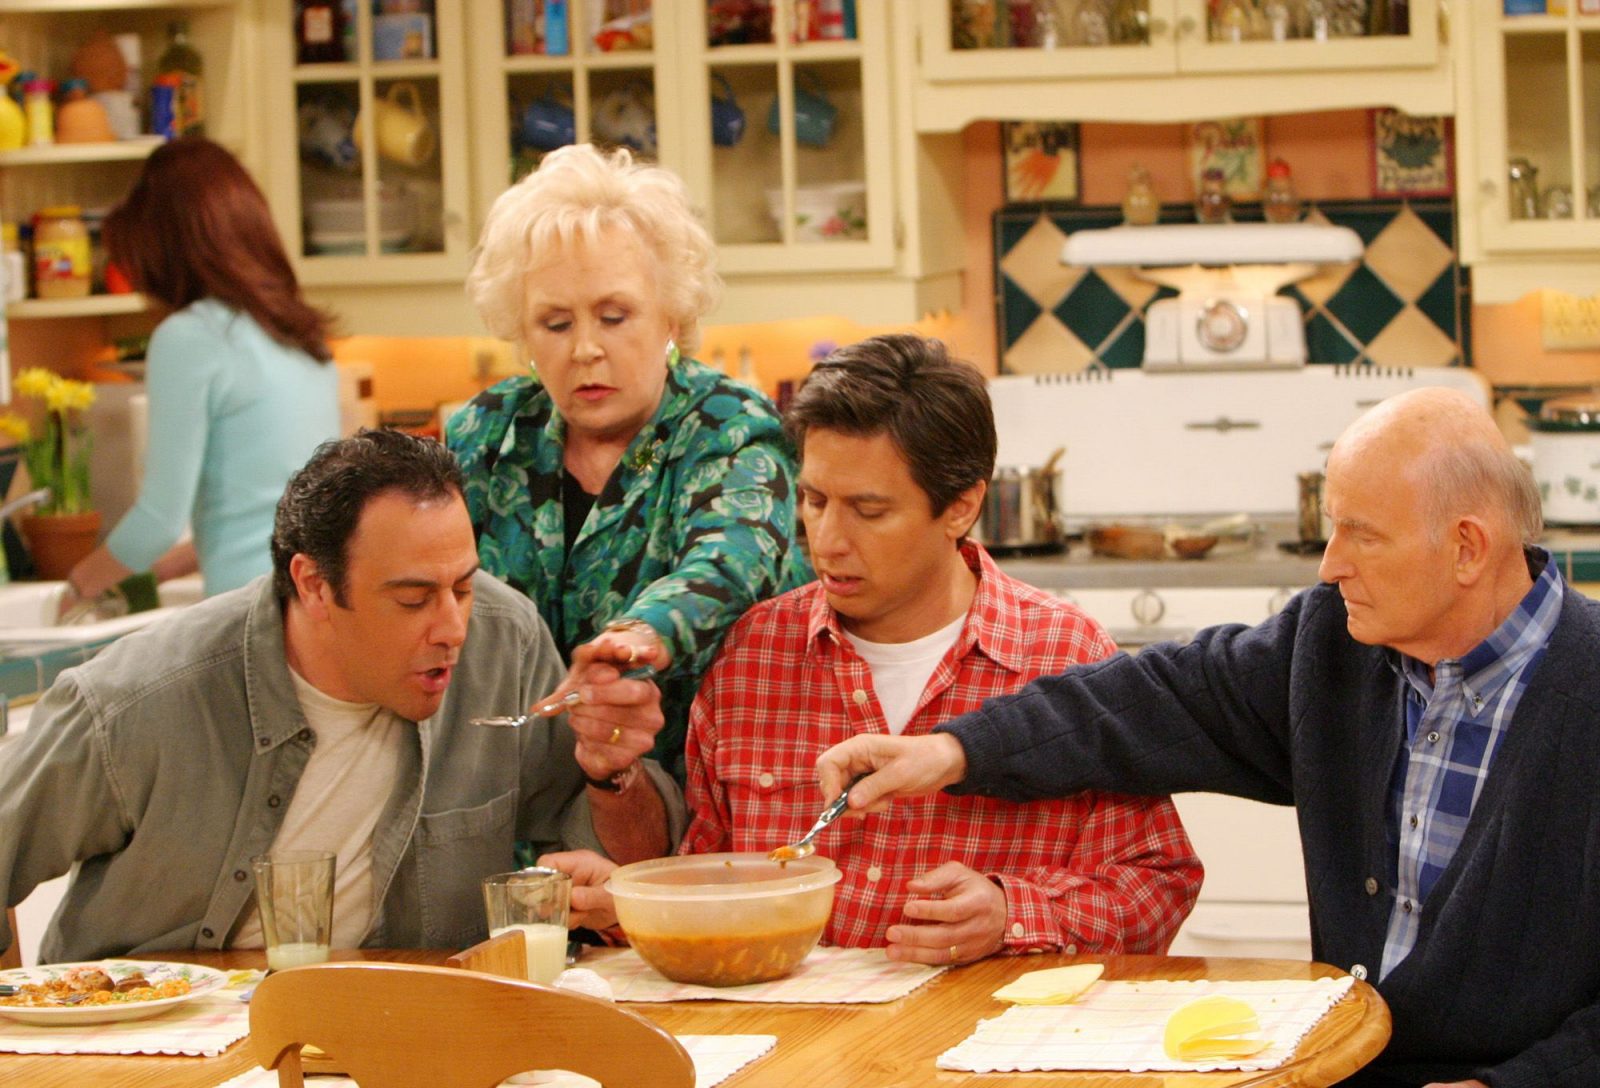 Do You Remember These TV Shows That Aired in the ’90s? Everybody Loves Raymond